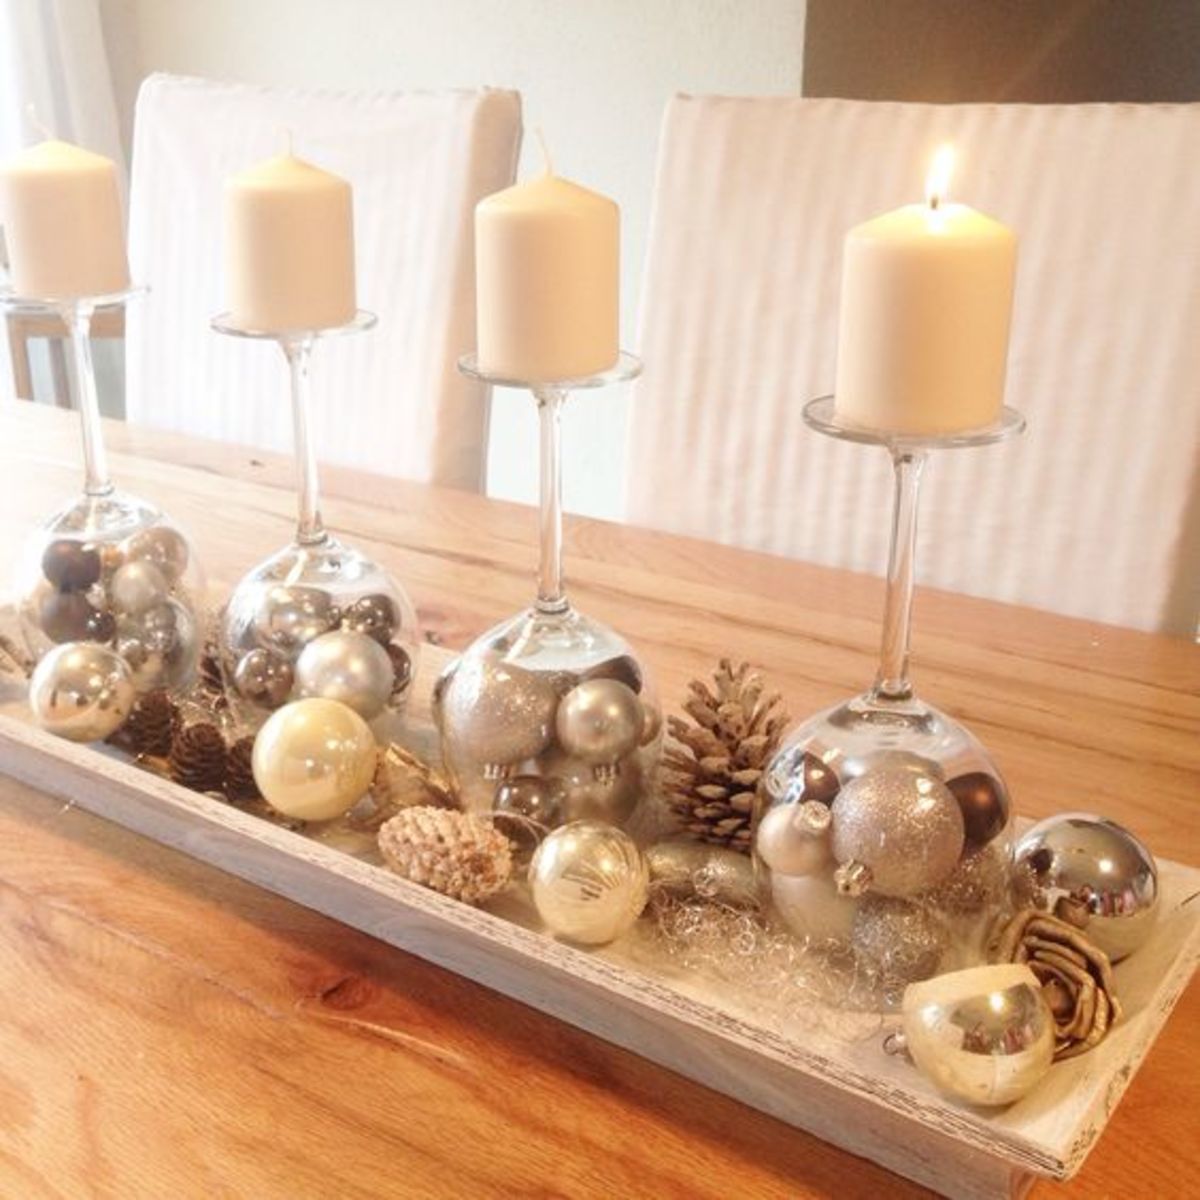 Silver, Gold and White Centerpiece With Wine Glasses and Baubles